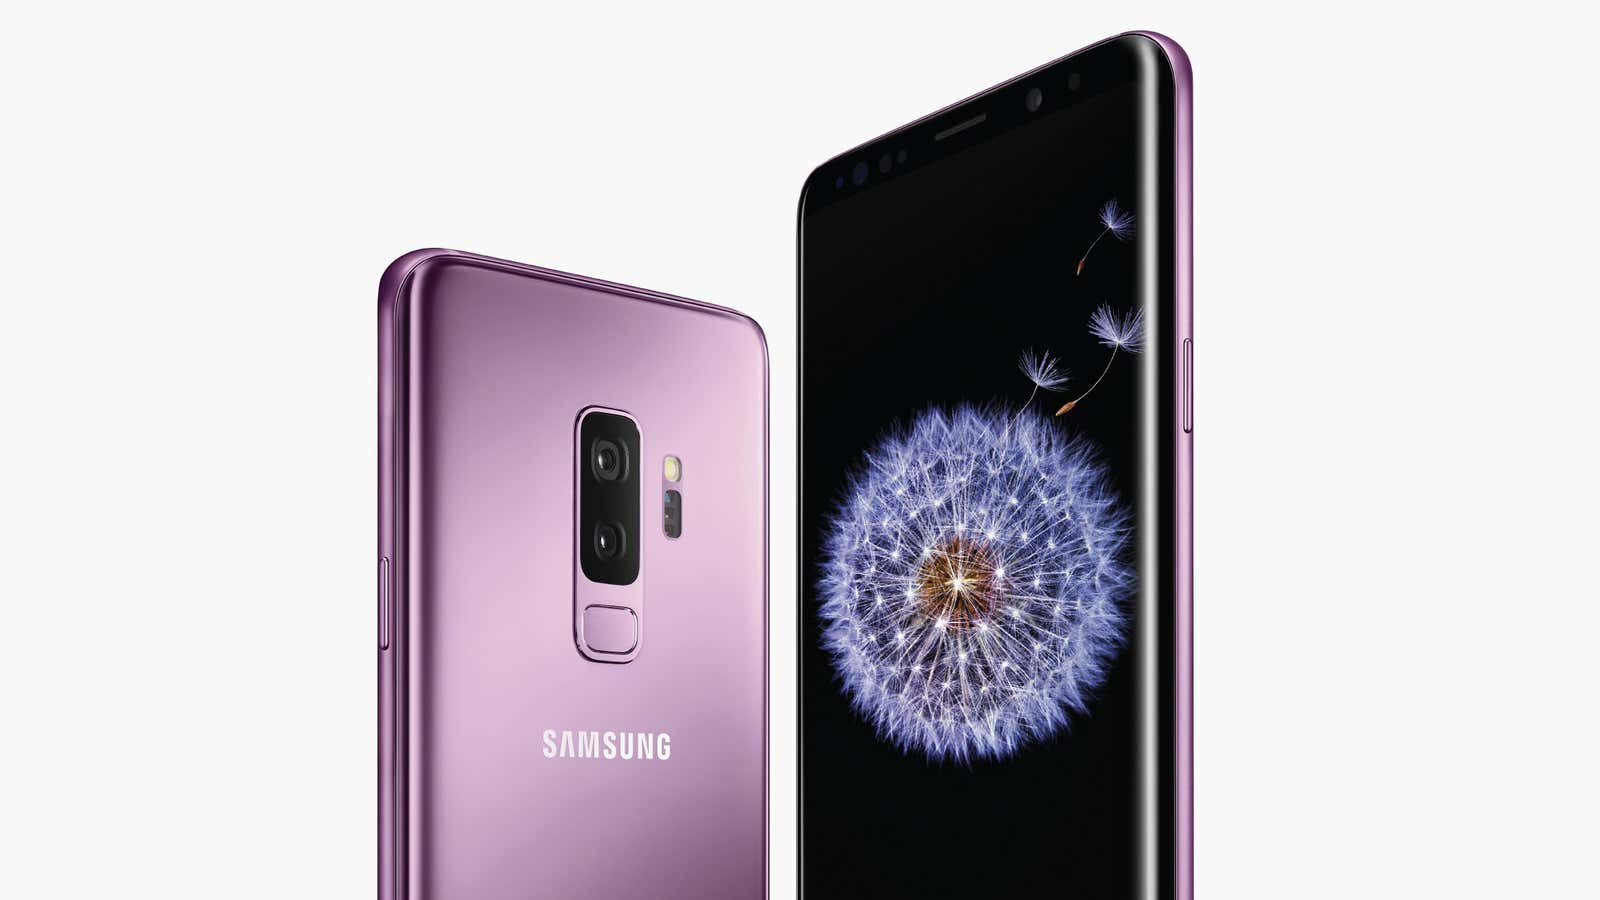 The new Galaxy S9.